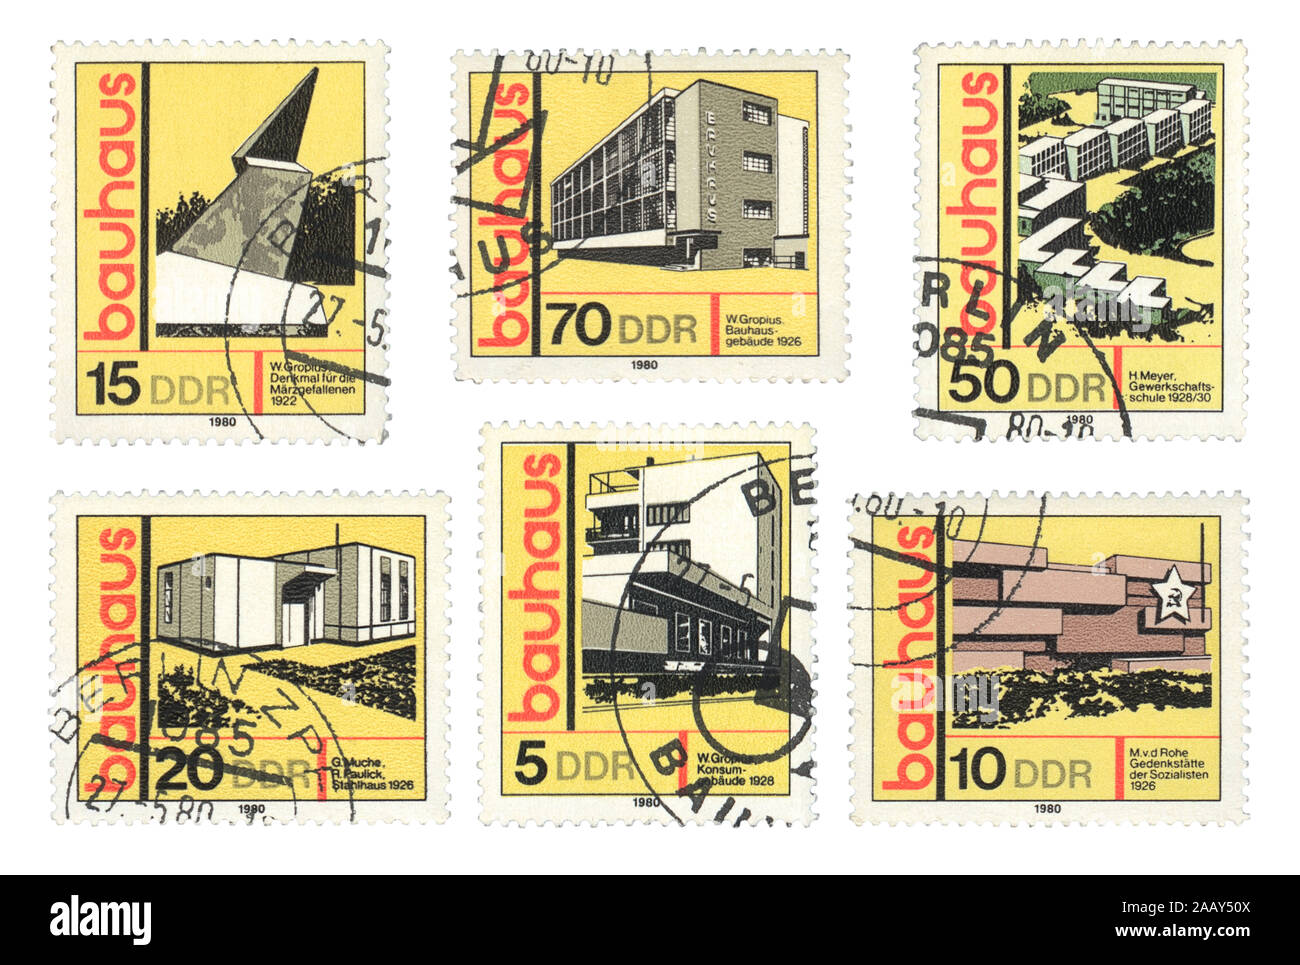 Staatliches Bauhaus 1919 . The stamps printed in DDR  shows Bauhaus buildings, Bauhaus school, 1980 Stock Photo